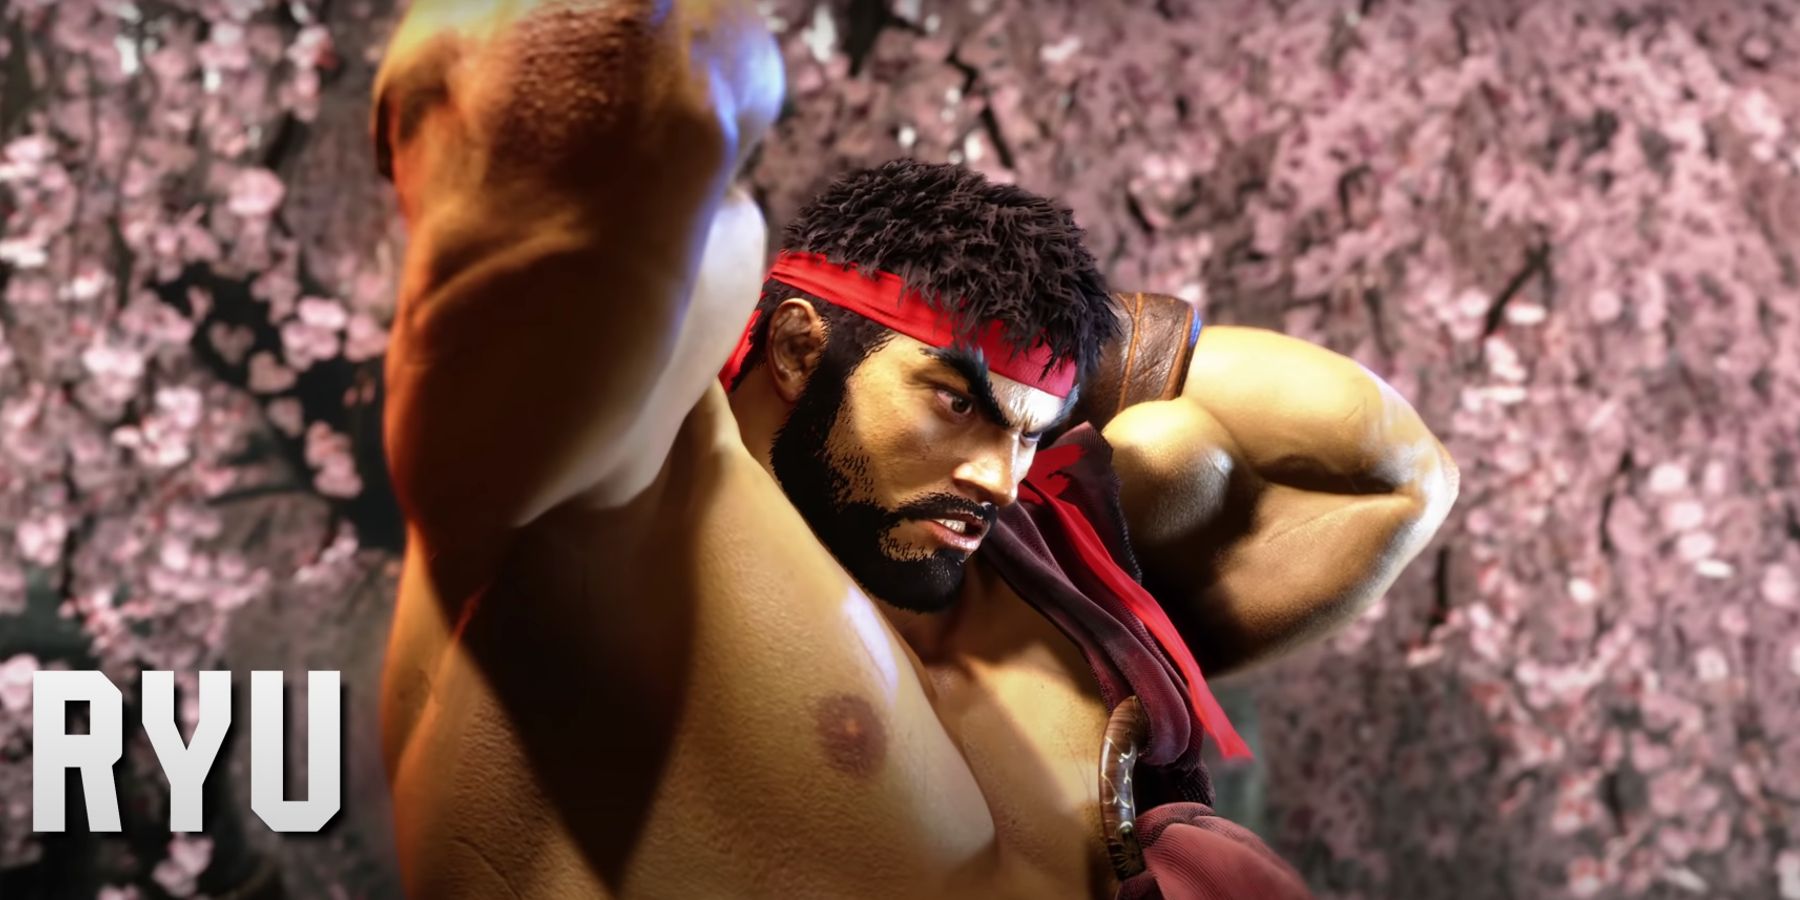 Classic Street Fighter character Ryu in SF6, posing with muscular arms flexed.